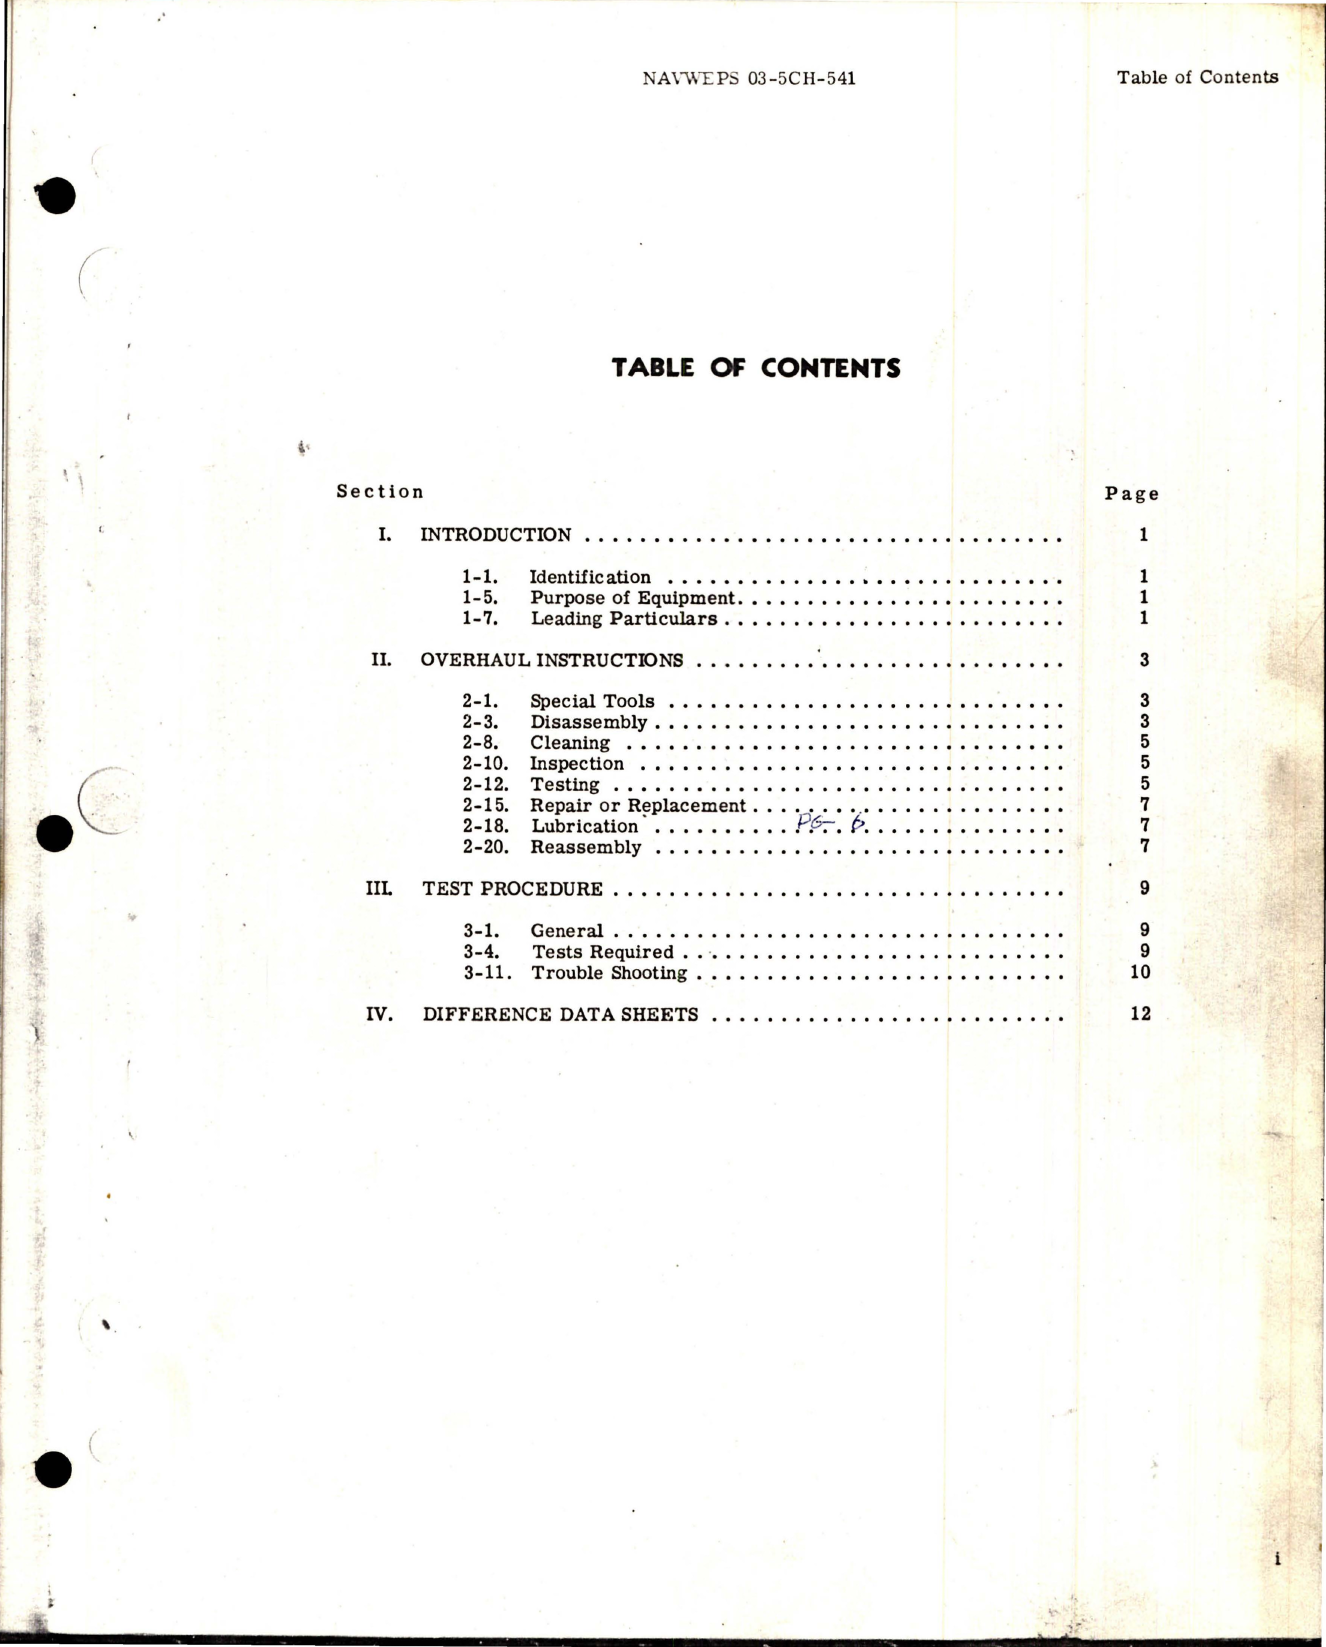 Sample page 5 from AirCorps Library document: Overhaul Instructions for Rudder Trim Actuator